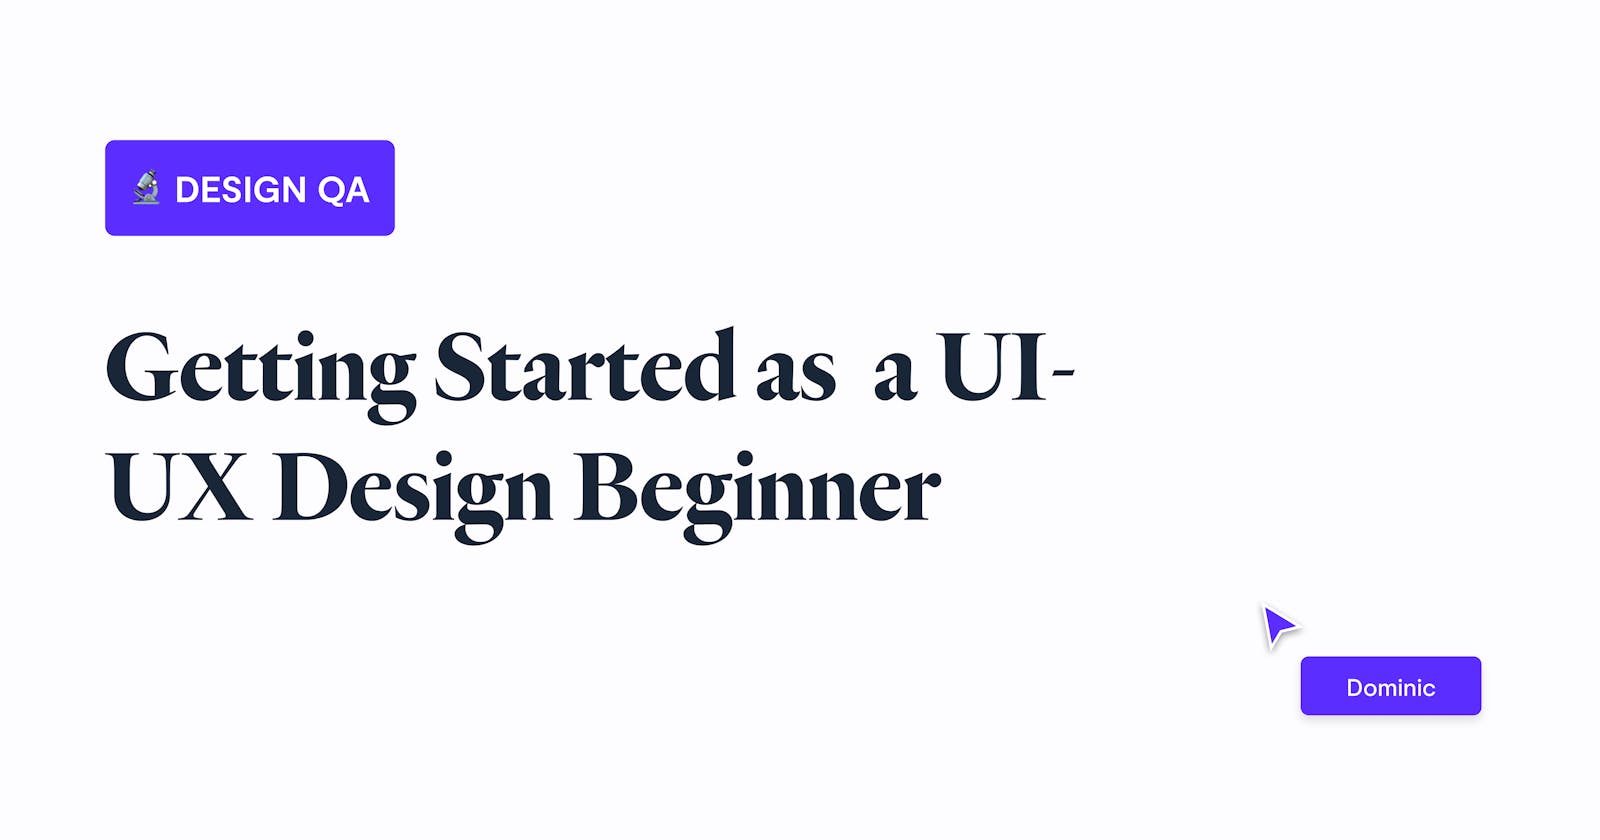 Getting Started as  a UI-UX Design Beginner